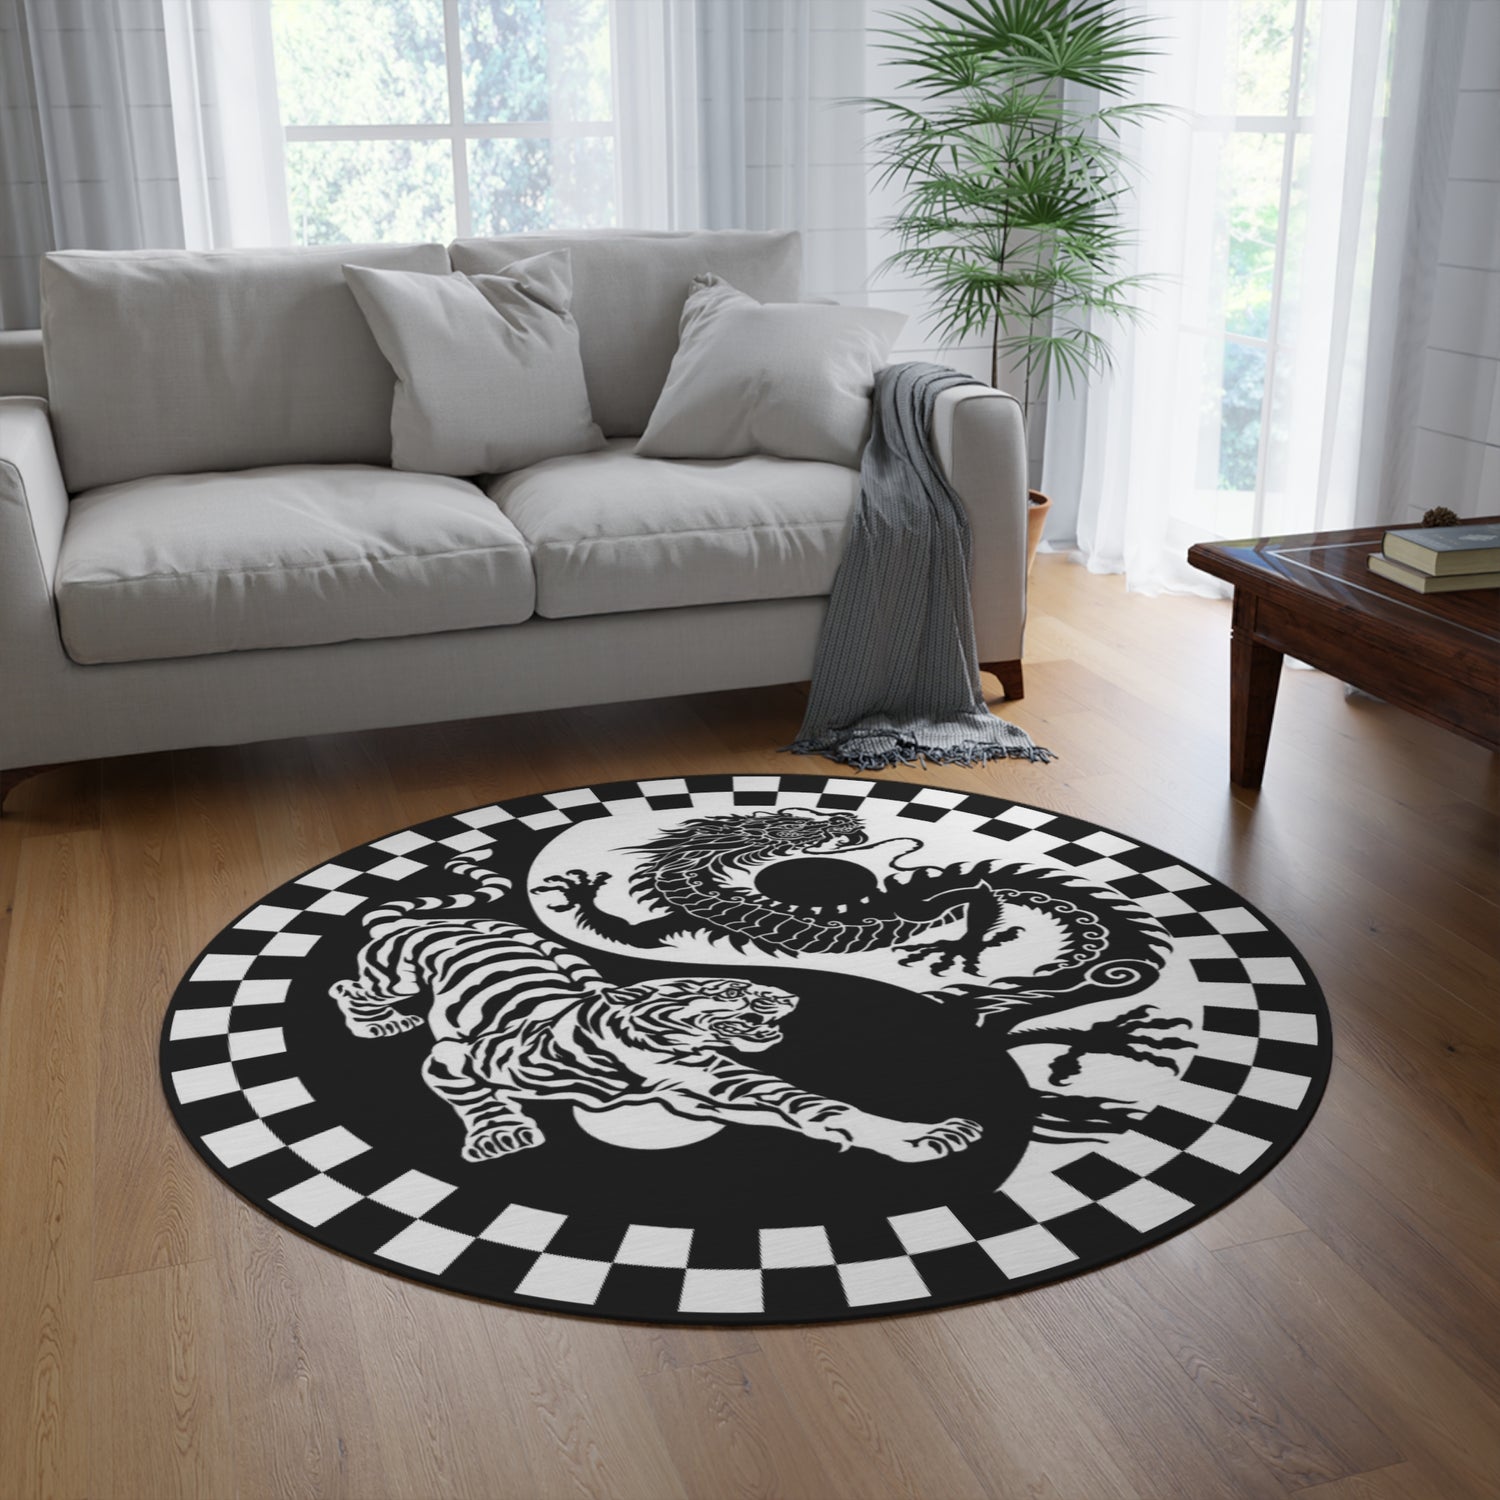 Round Rug Tiger and Dragon black and white